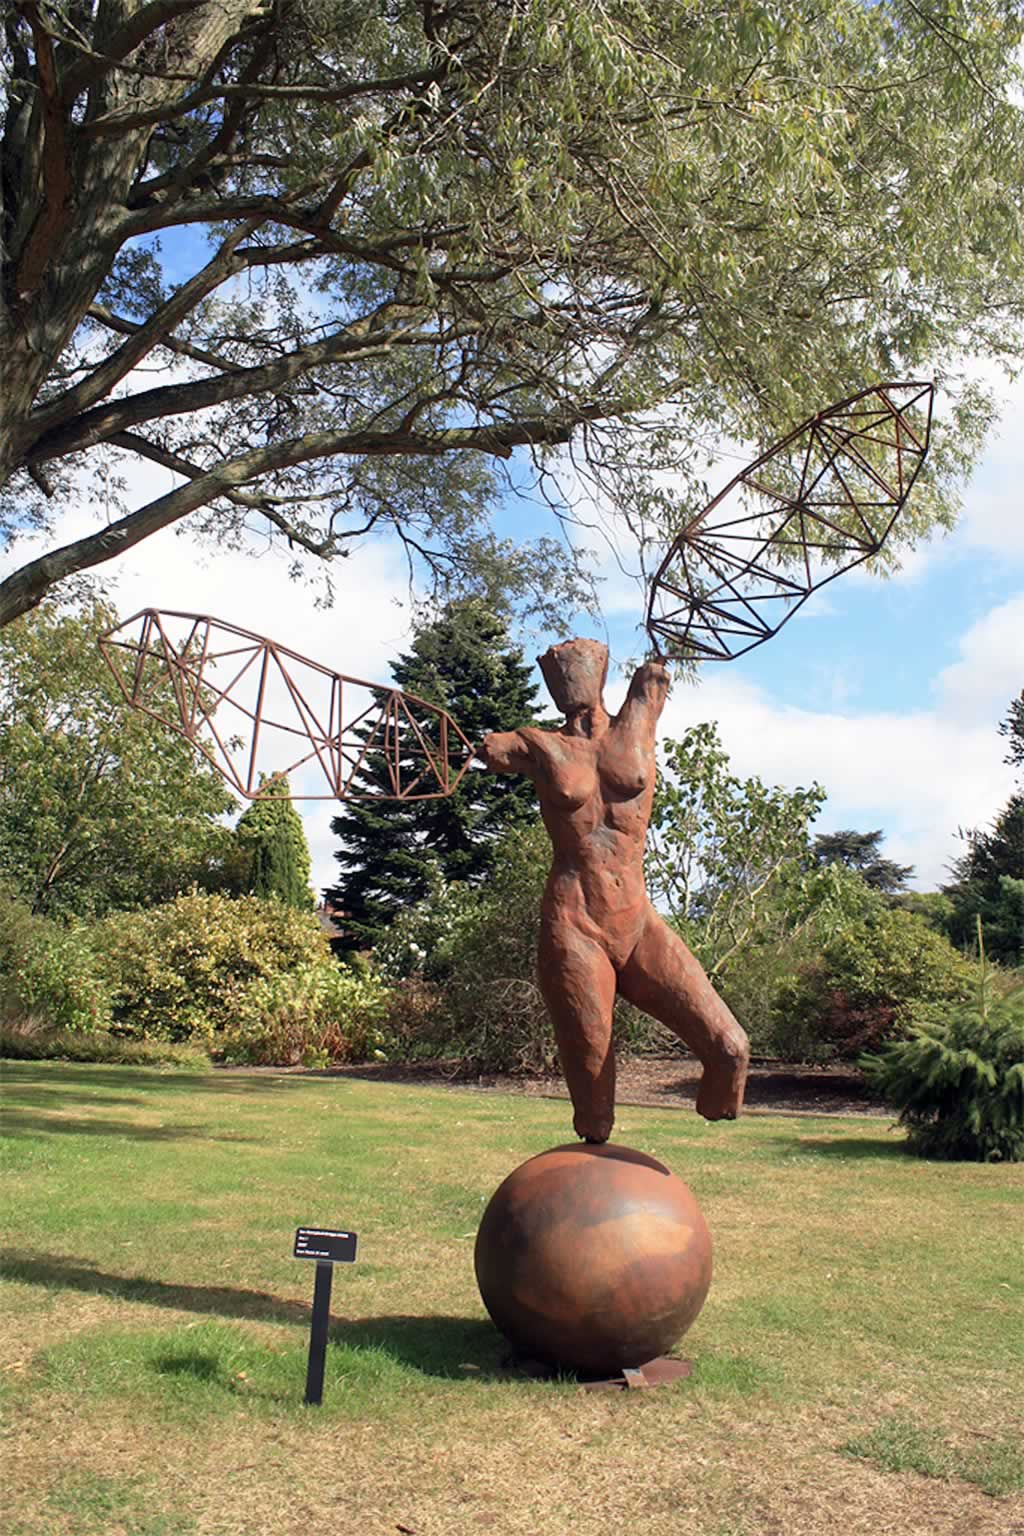 Arc I at Leicester Botanic Gardens (abstract figurative sculpture) by sculptor Ian Campbell-Briggs